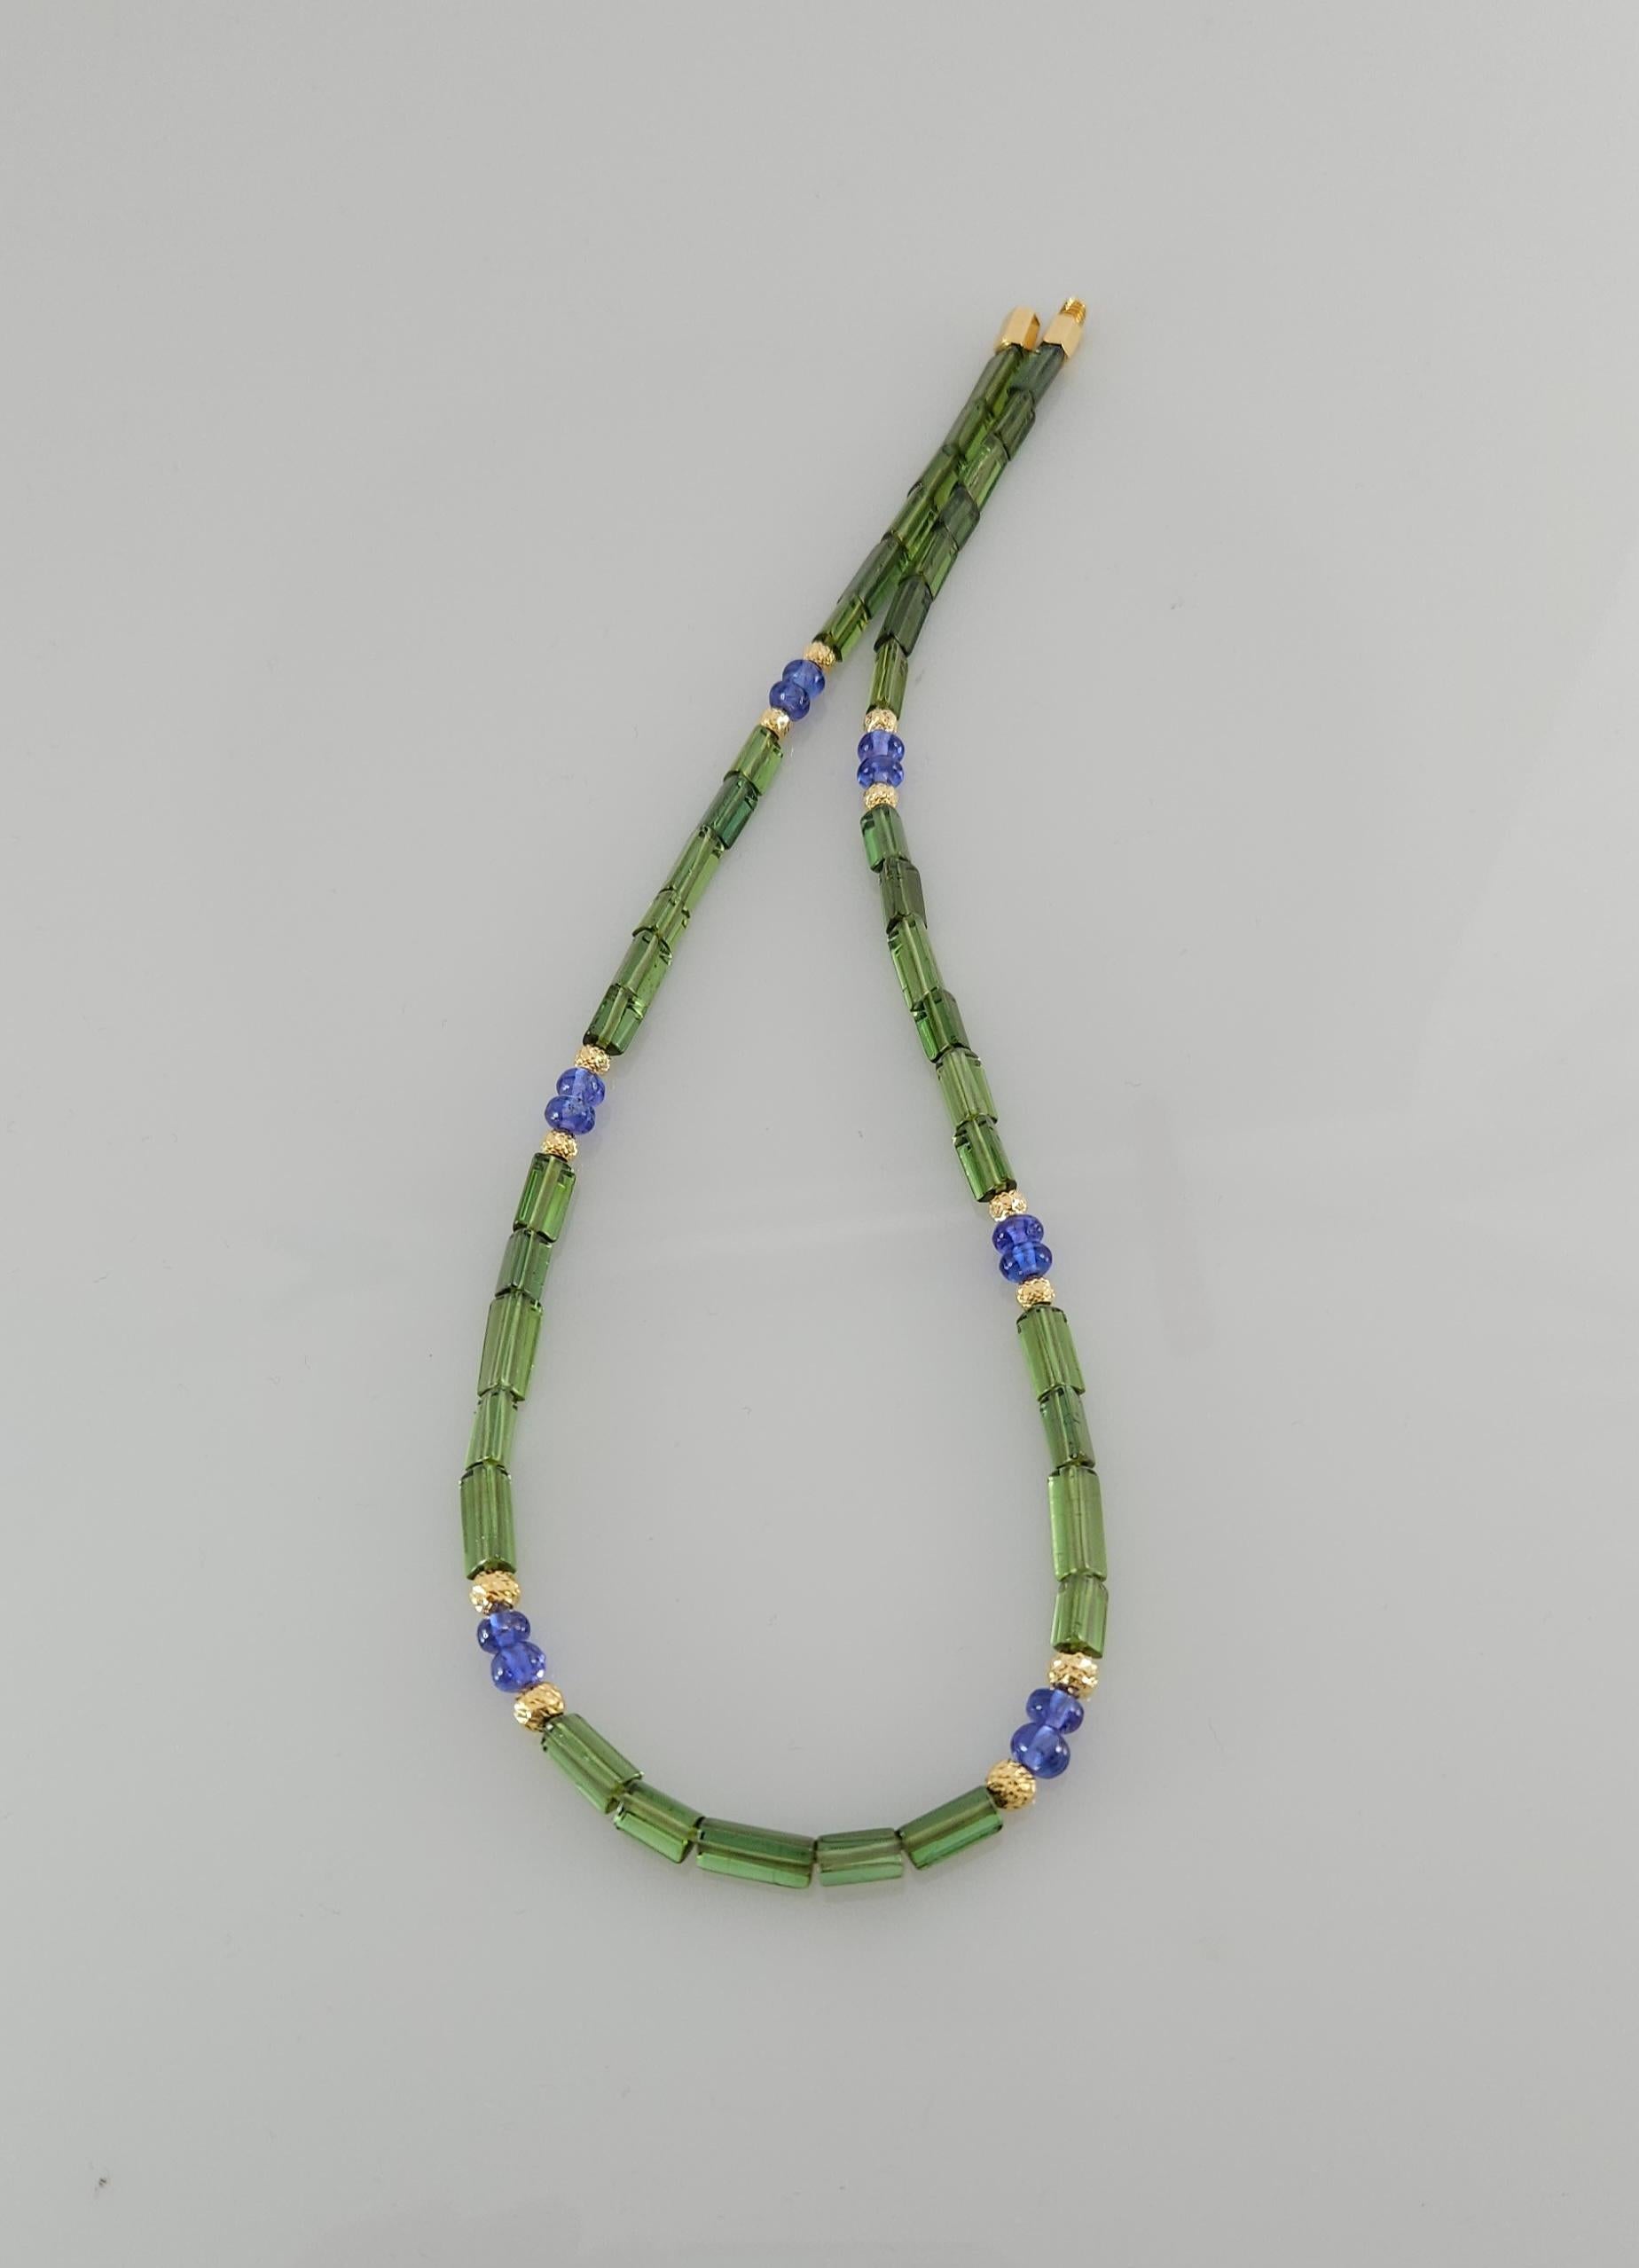 Green Tourmaline Crystal & Tanzanite Beaded Necklace with 18 Carat yellow Gold For Sale 1